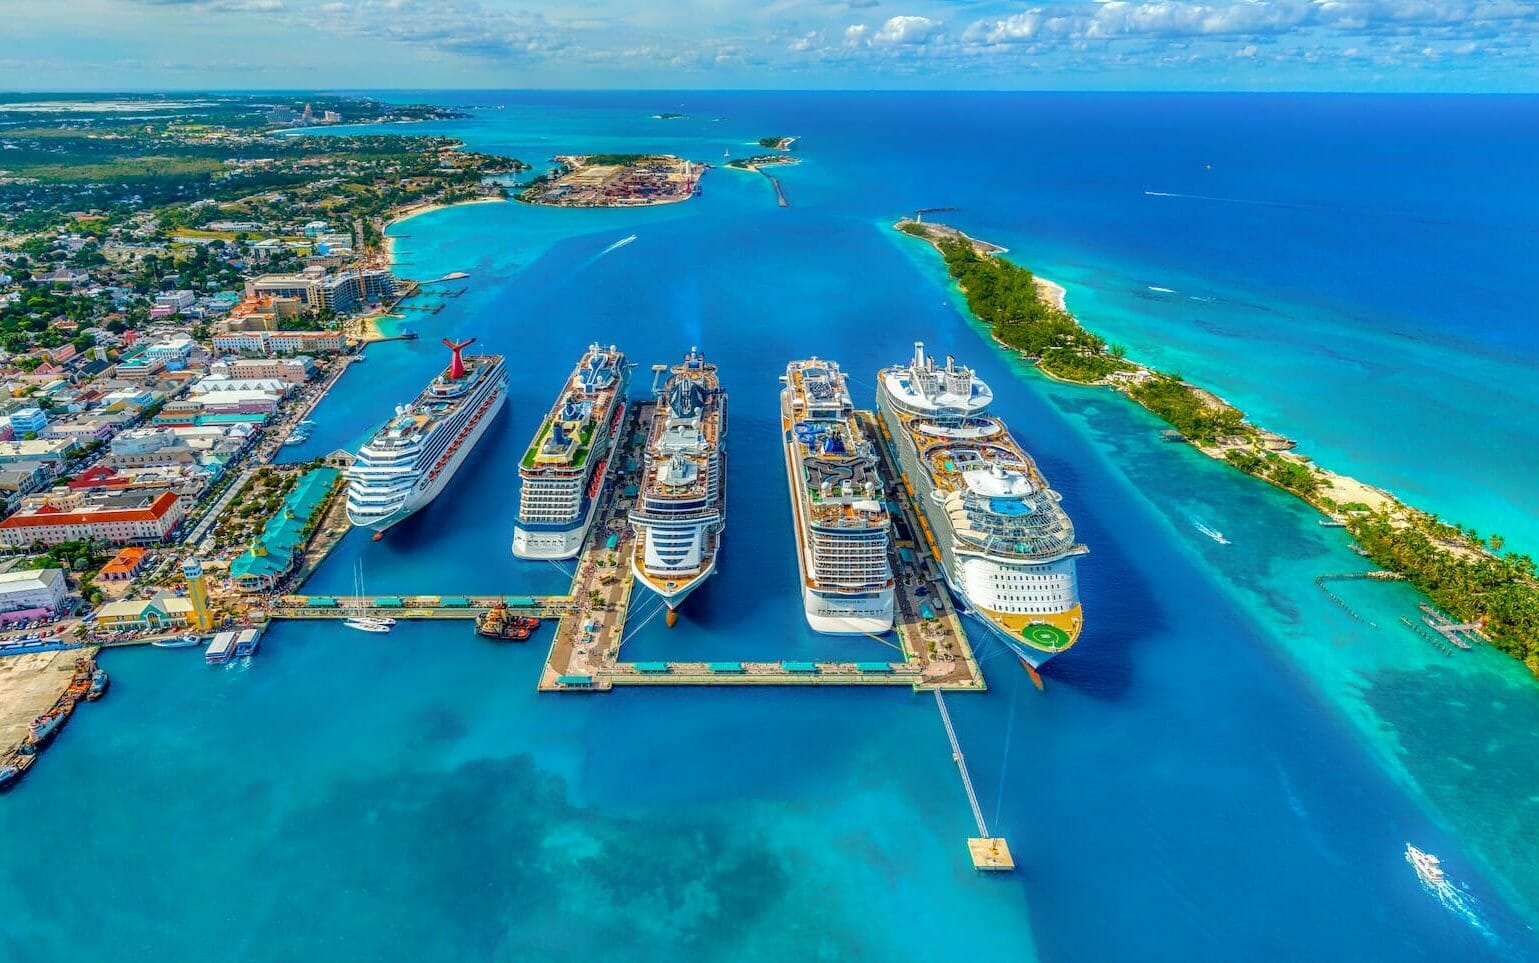 aerial photography of white and blue cruise ships during daytime